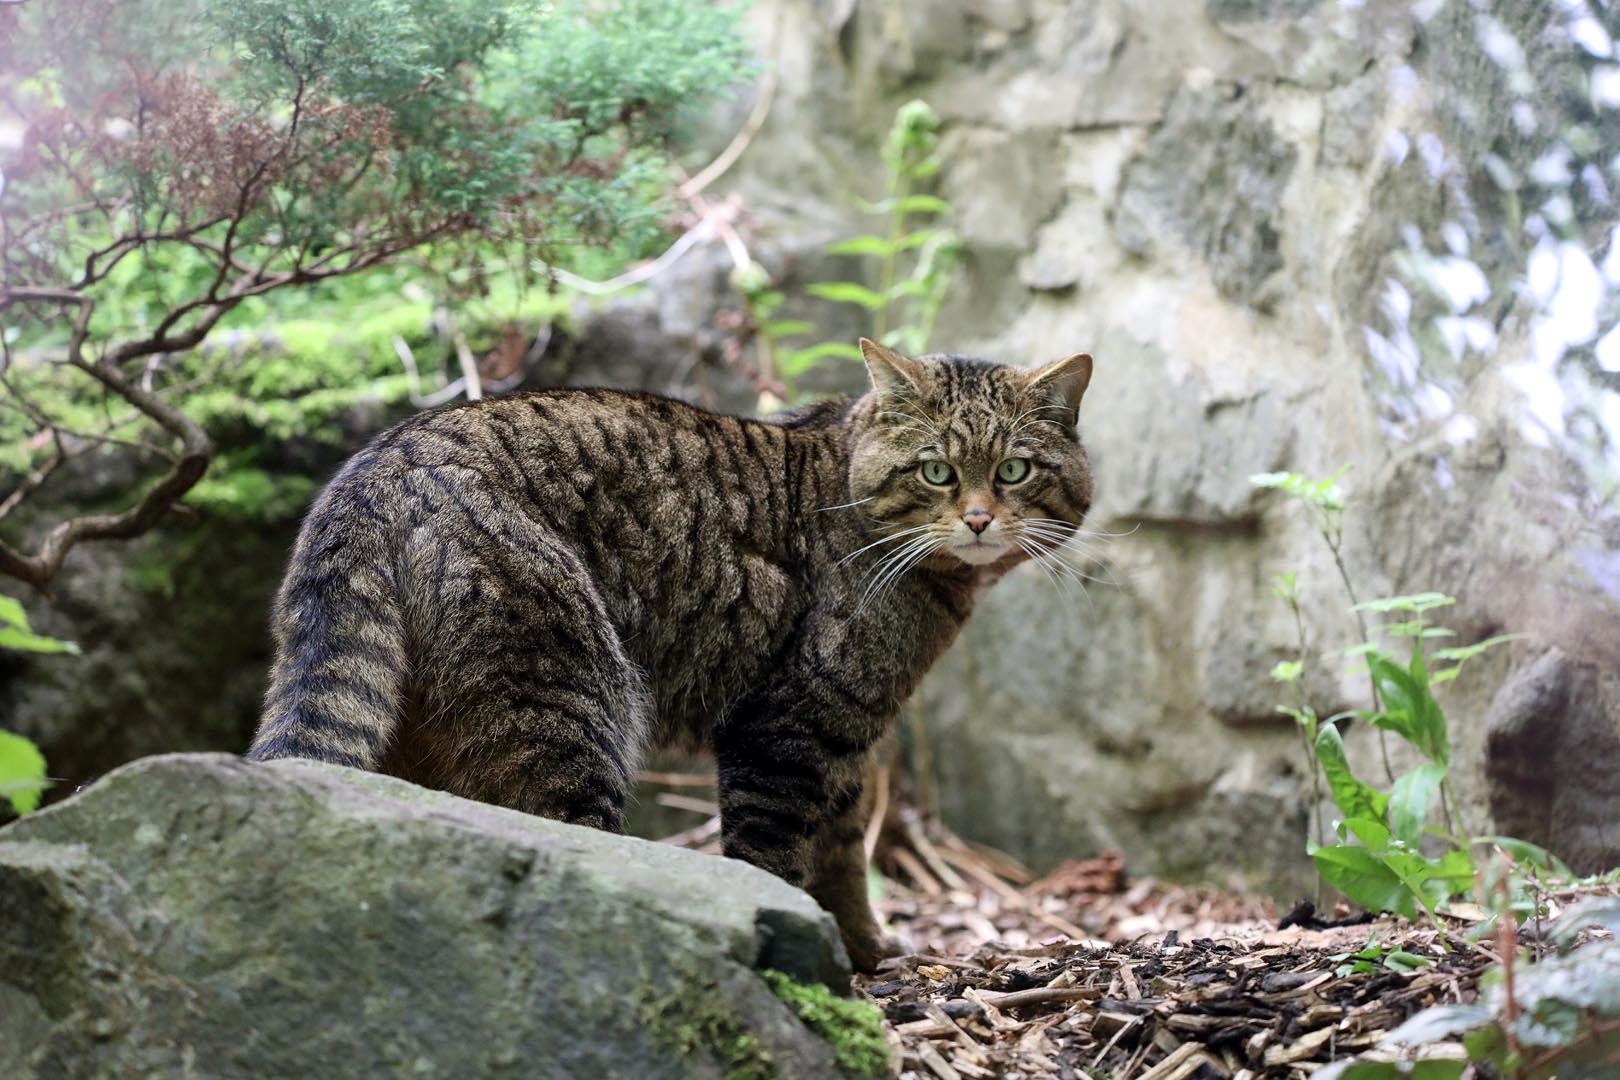 Wildcat at Edinburgh Zoo looking at the camera IMAGE: Amy Middleton (2023)